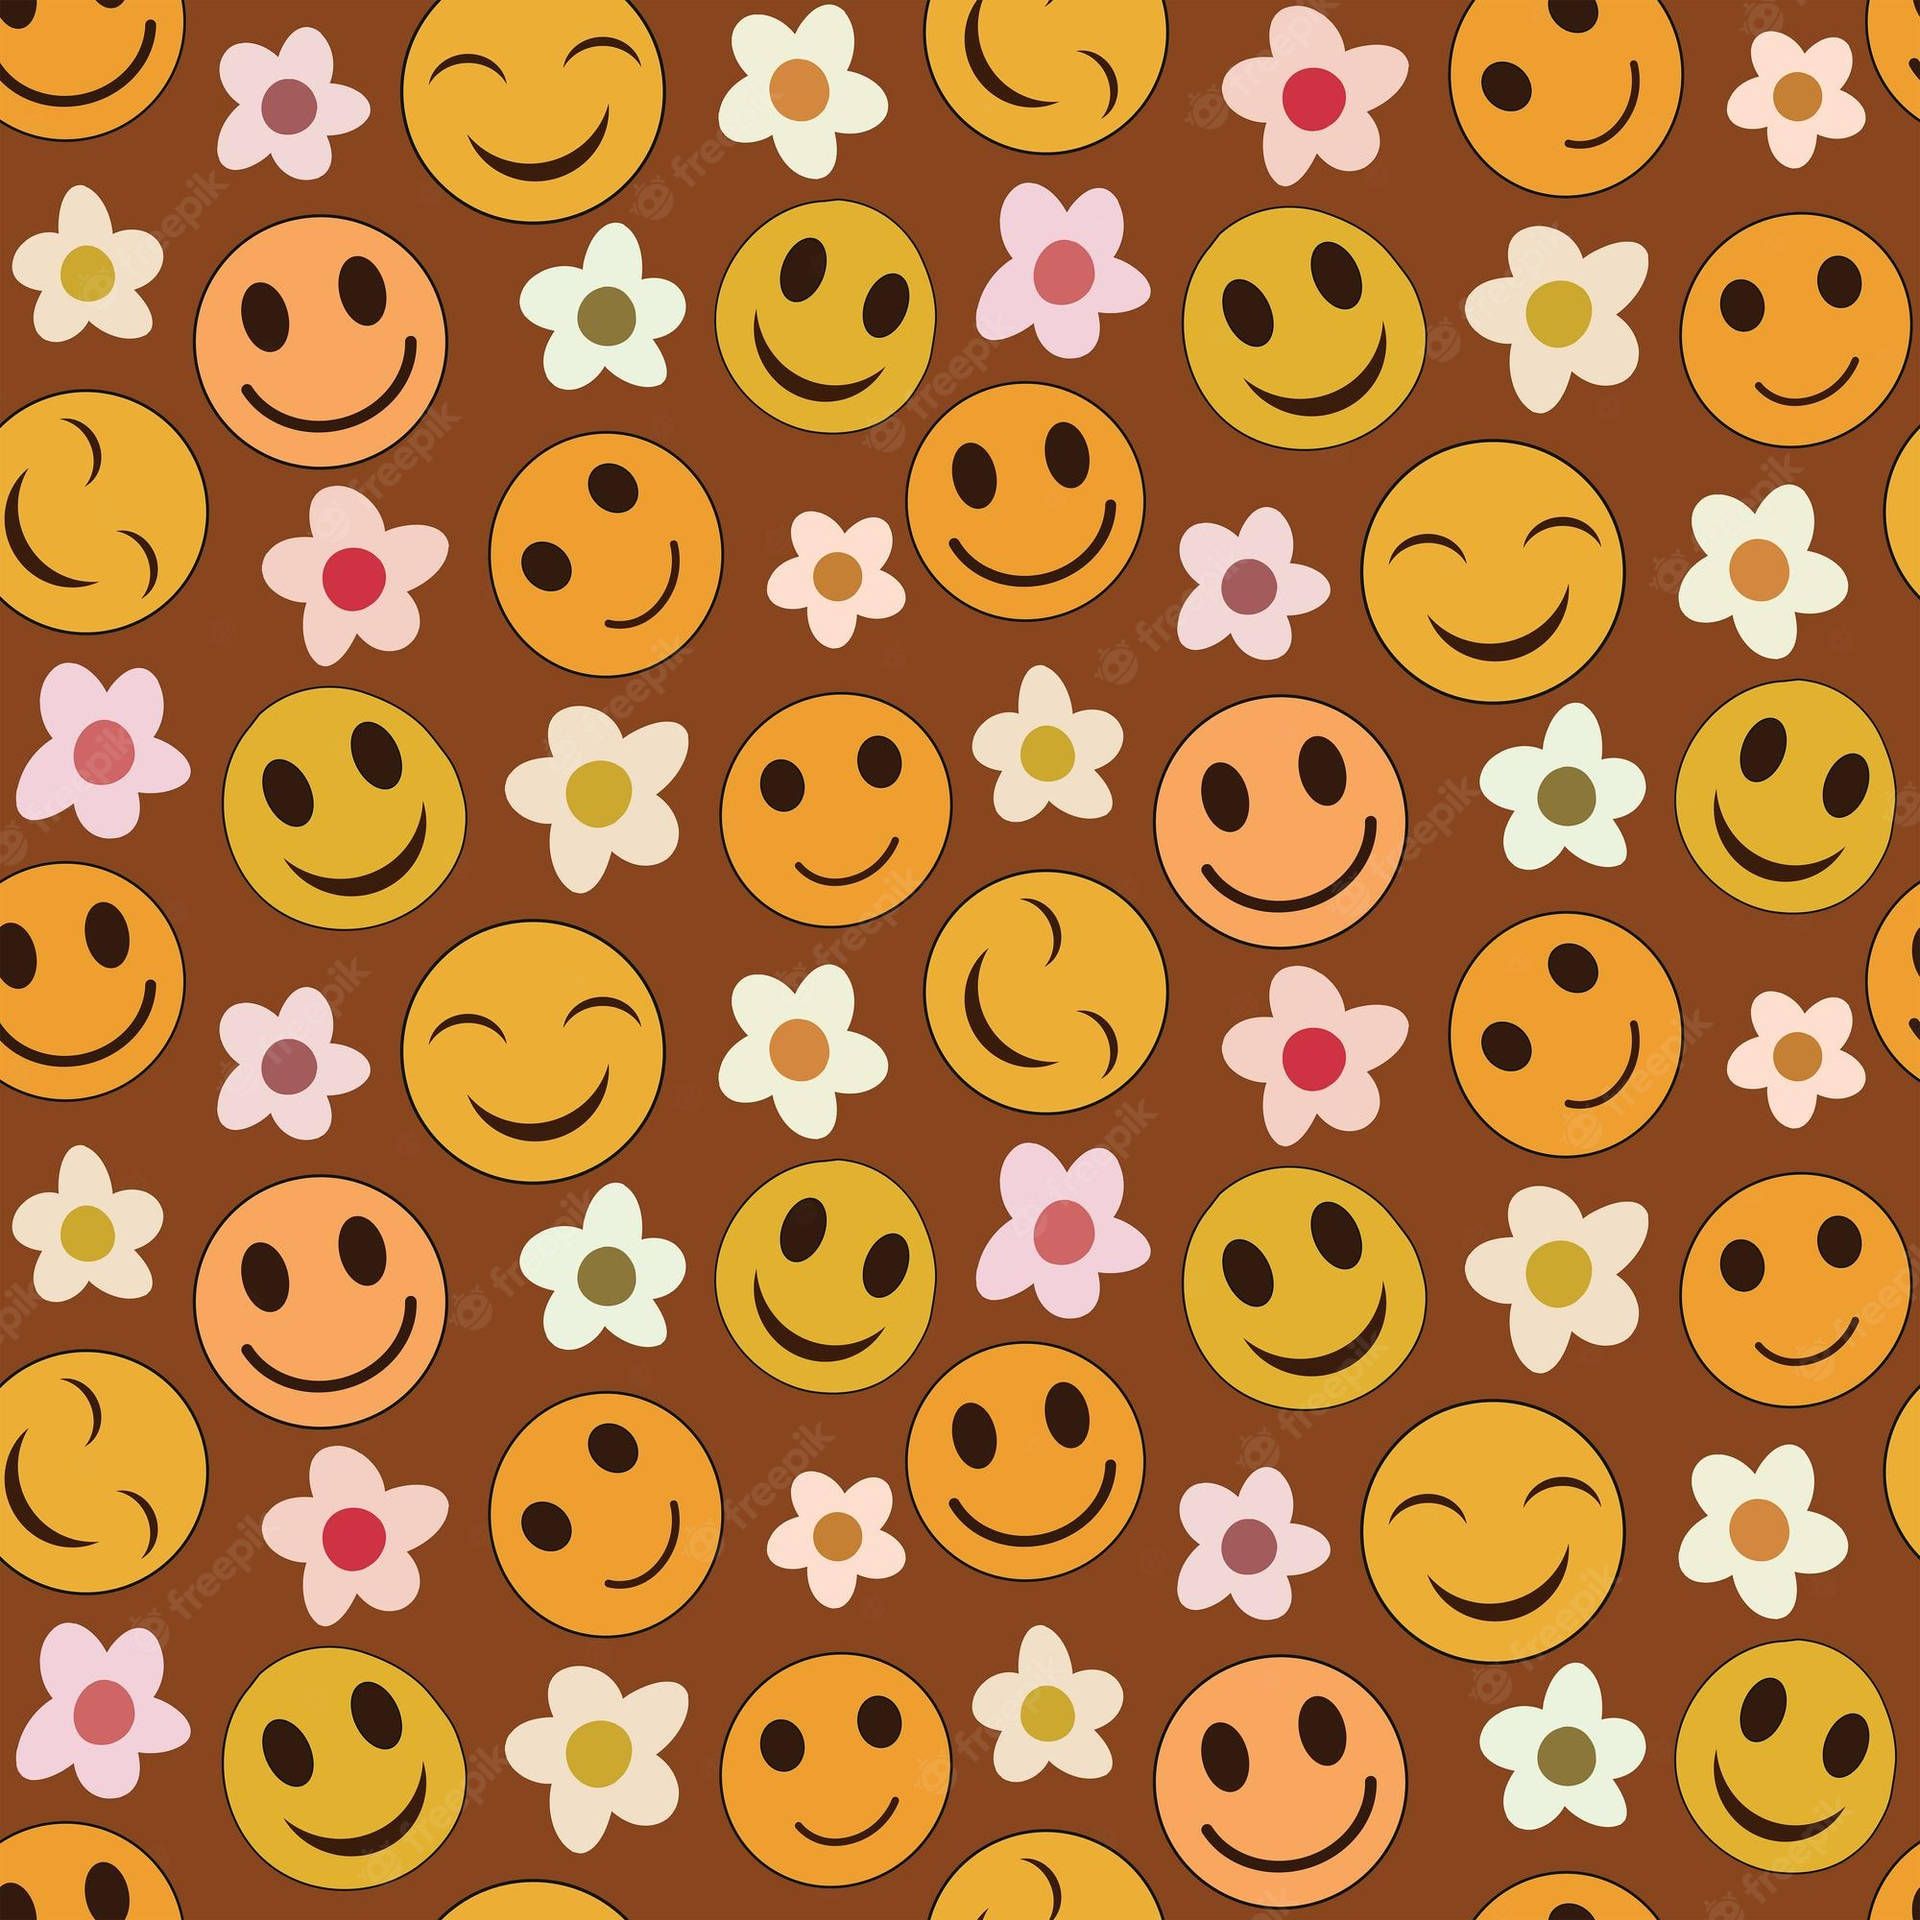 Seamless pattern with emoji and flowers on a brown background. Vector illustration. - Smiley